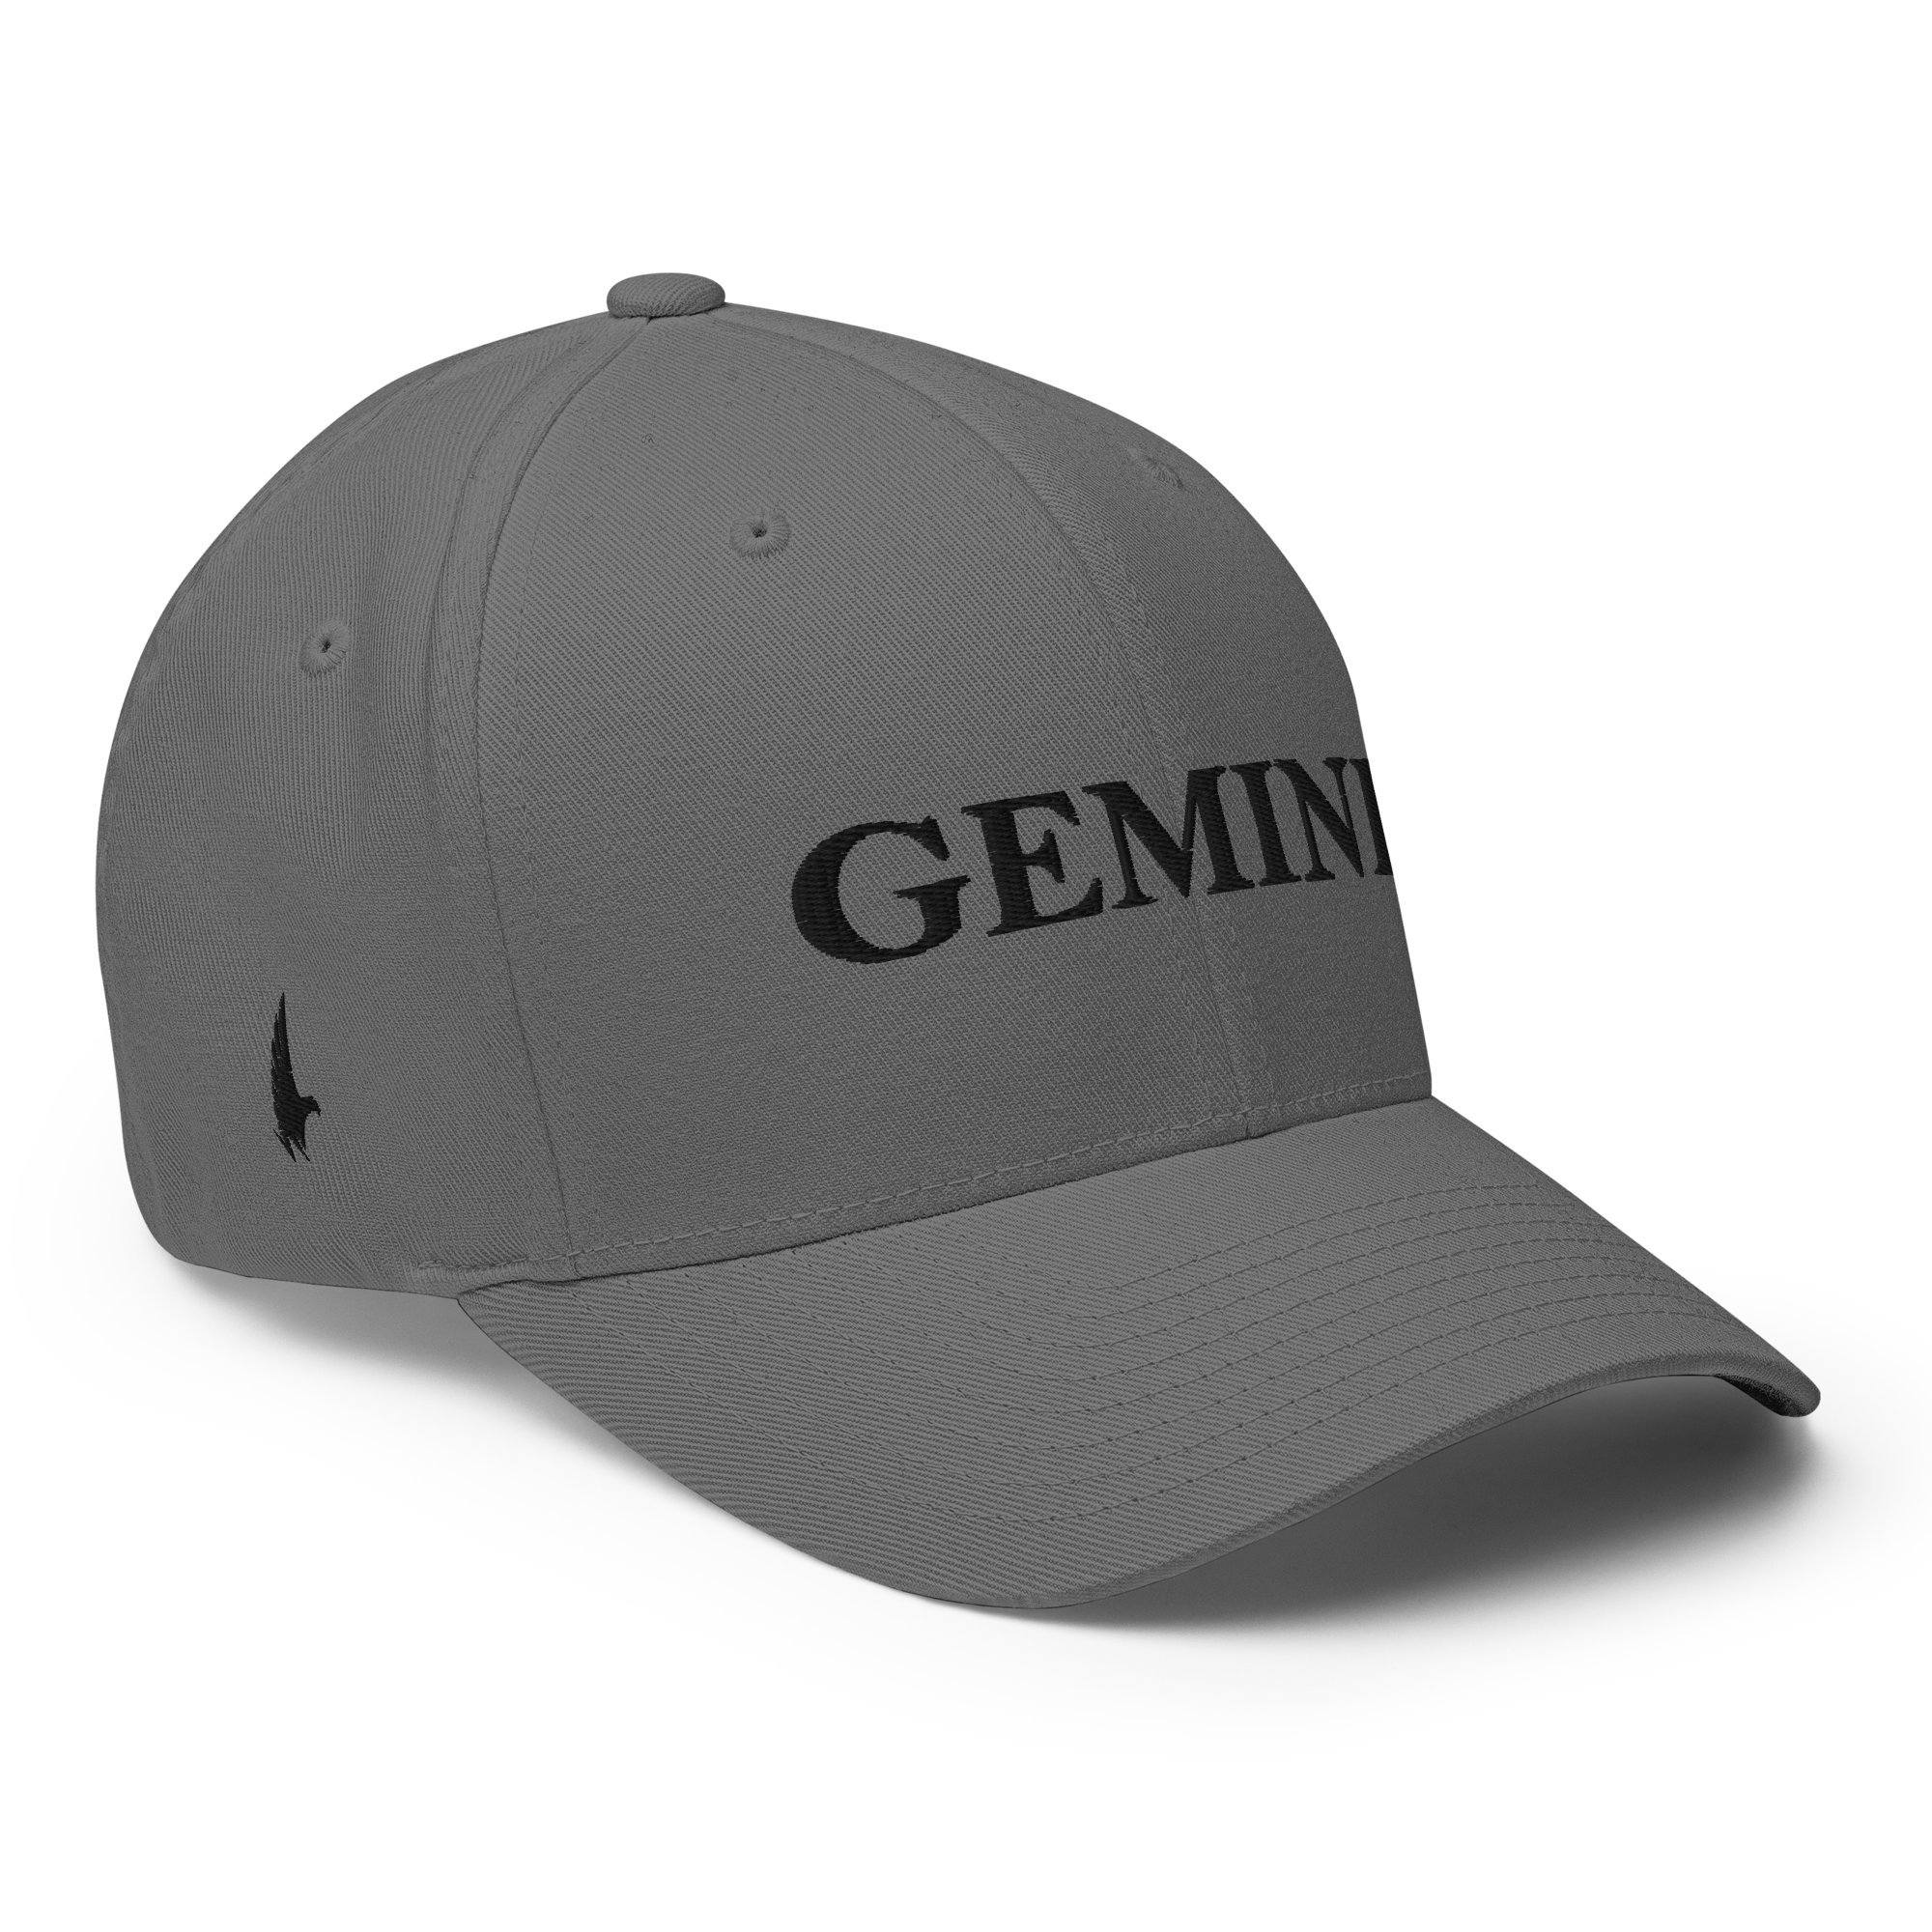 Original Gemini Fitted Hat Grey Black Fitted - Loyalty Vibes